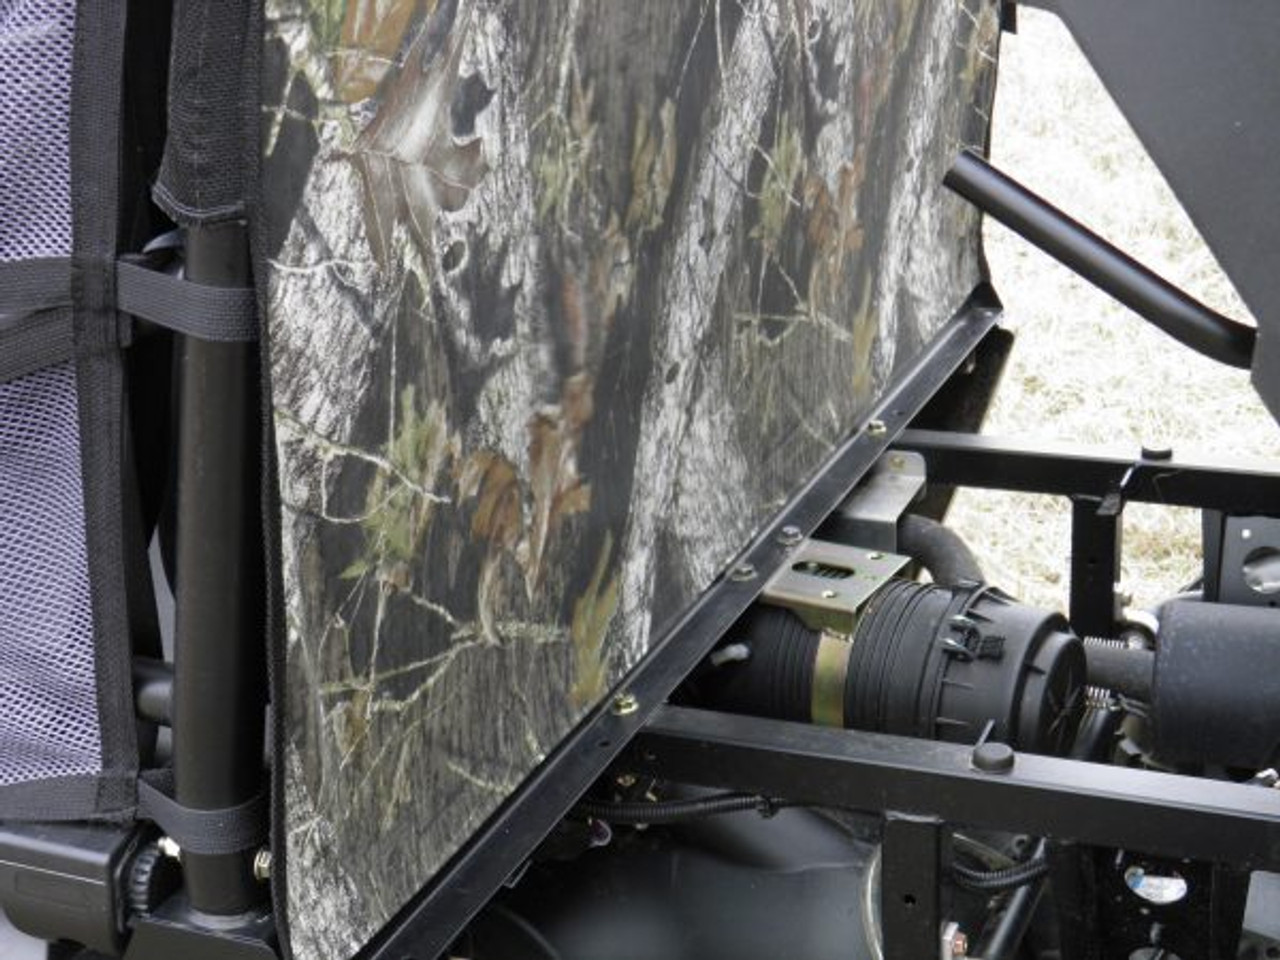 3 Star side x side Polaris Ranger Mid-Size Crew 500/570 vinyl windshield top and rear window close-up view